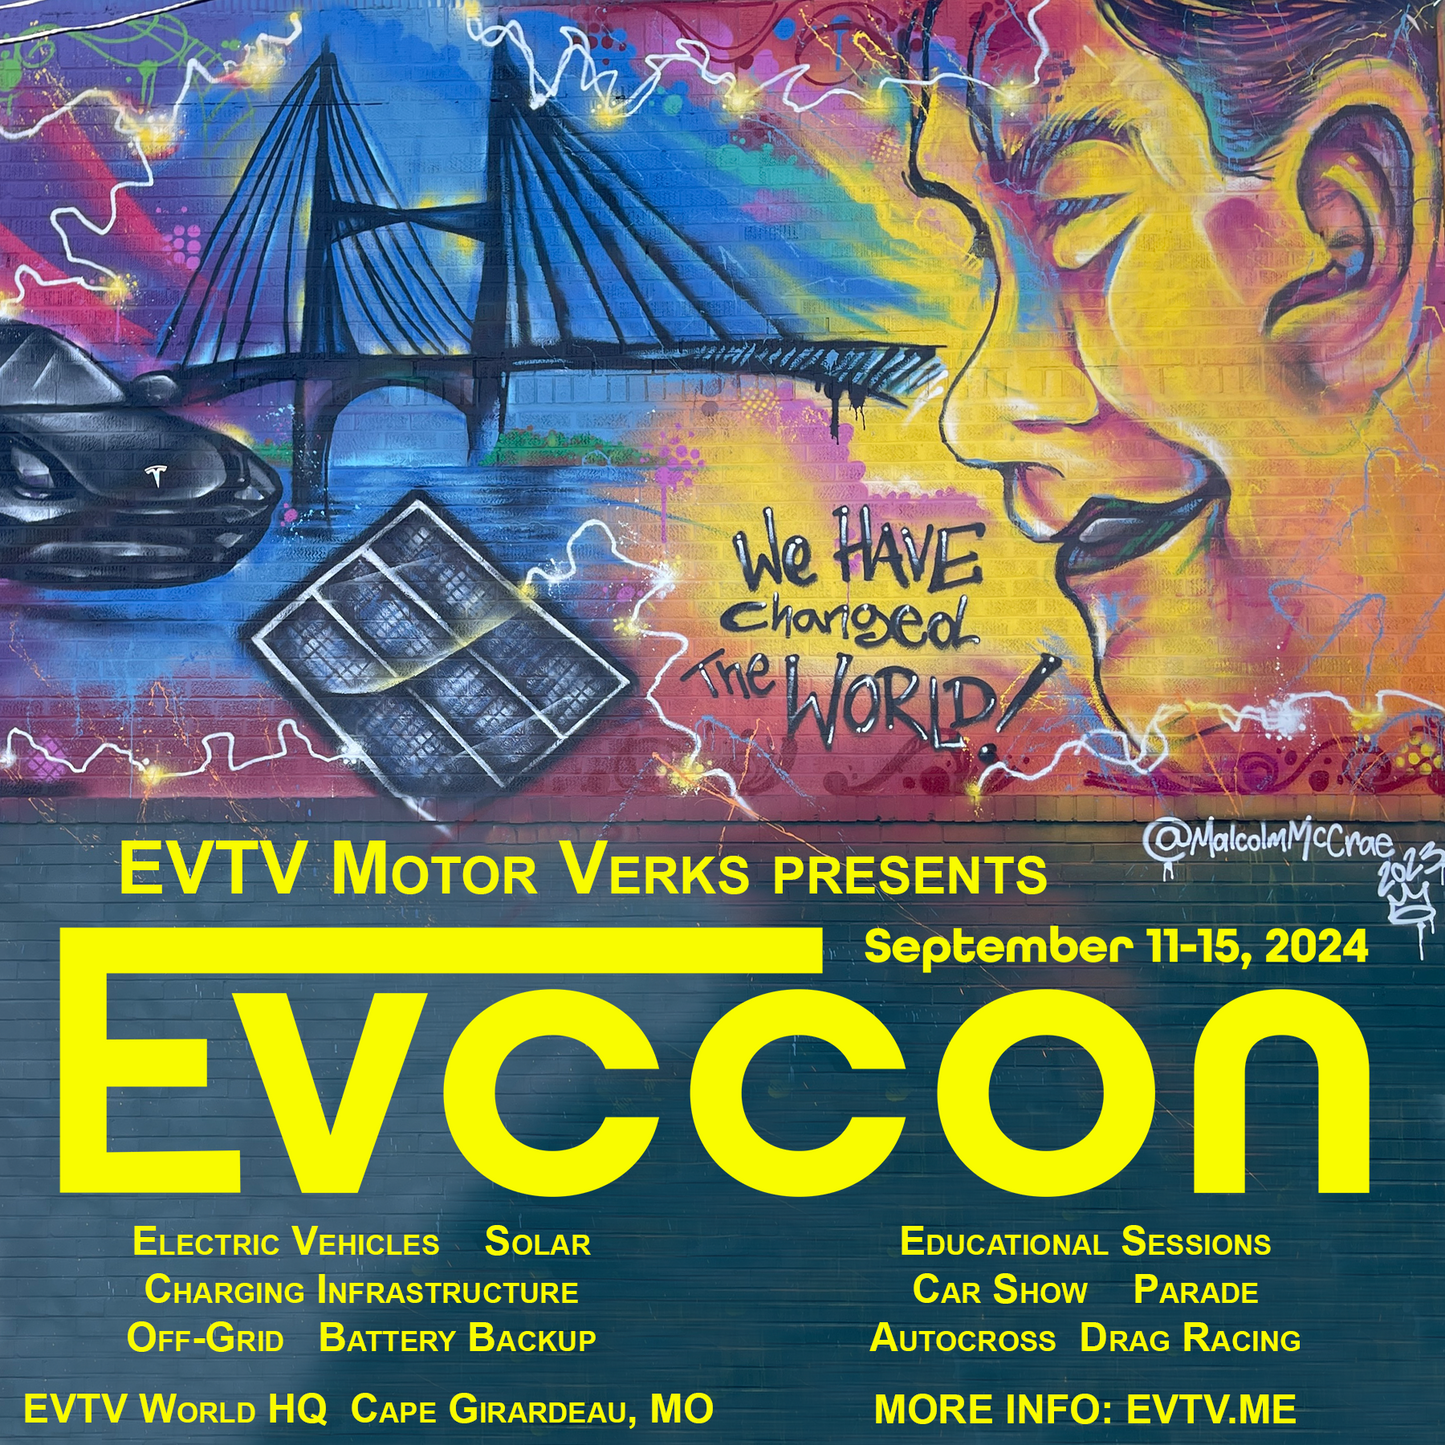 Sixth Annual-ish Electric Vehicle & Charging CONvention